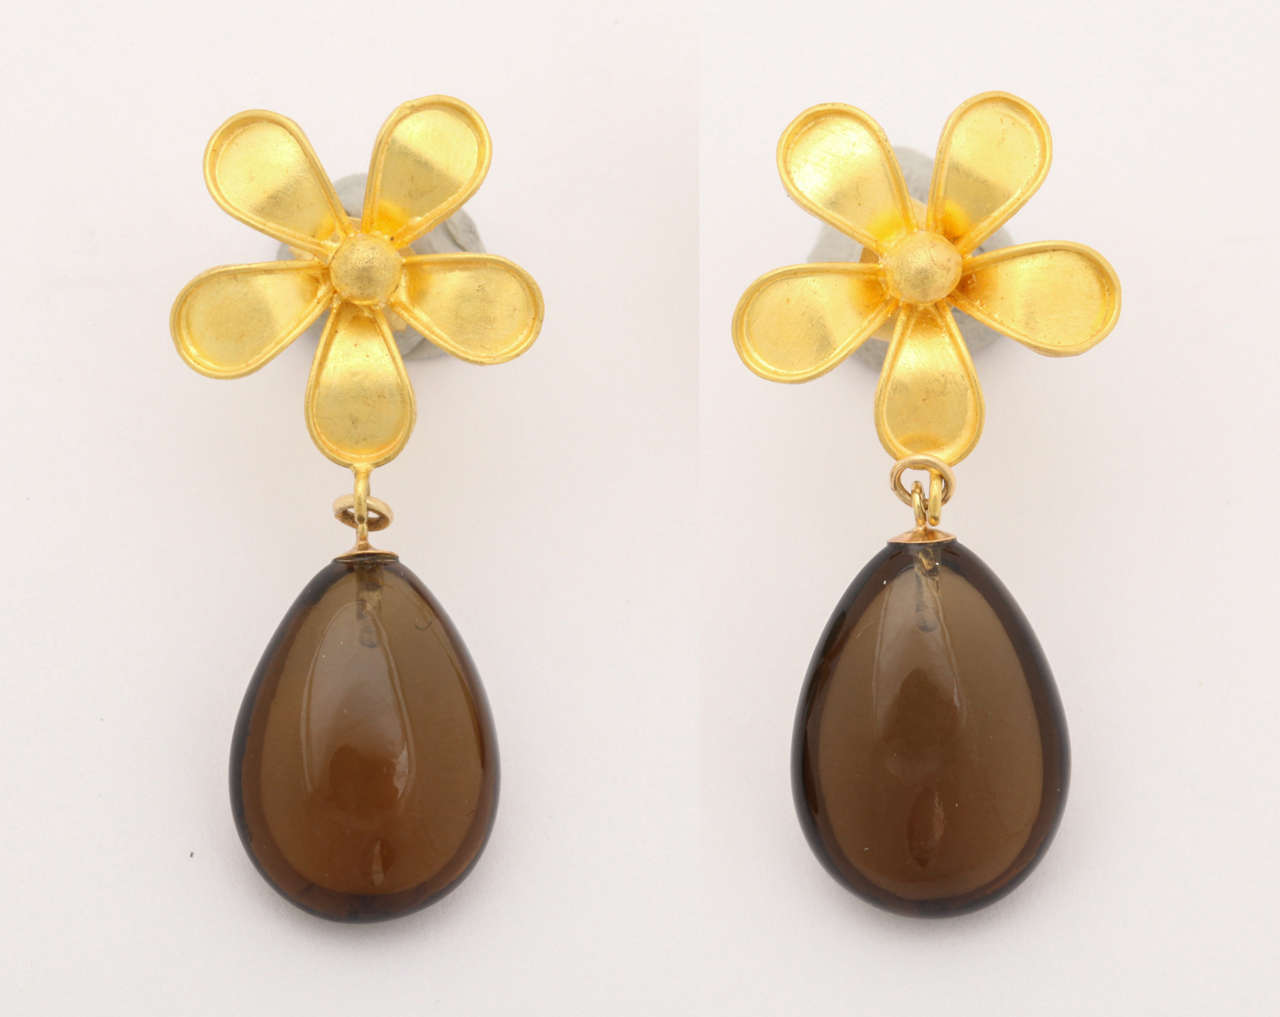 Lovely 22 kt flower earring tops with smoky quartz cabochon pear shaped  drops gracefully dangling. The combination of the rich gold color and smoky quartz drops are great for the fall. The drops are smooth and beautifully cut to give a nice glow as